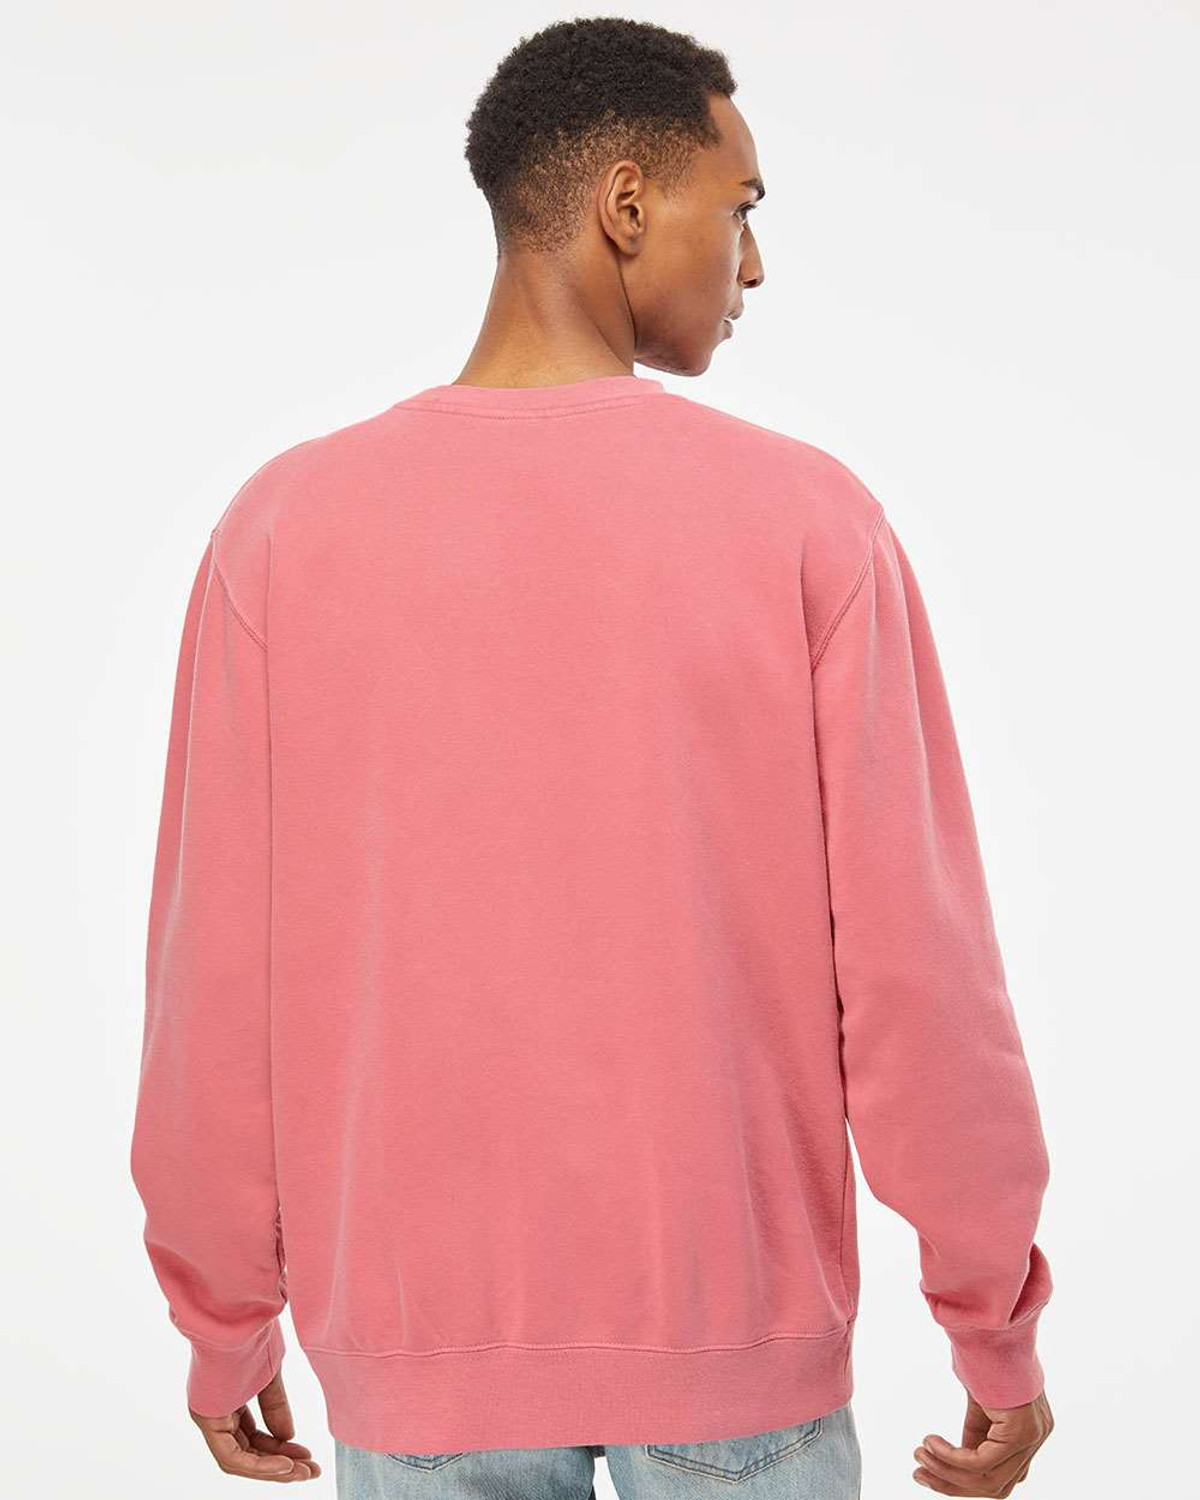 Independent Trading Co. PRM3500 Heavyweight Pigment-Dyed Crewneck Sweatshirt